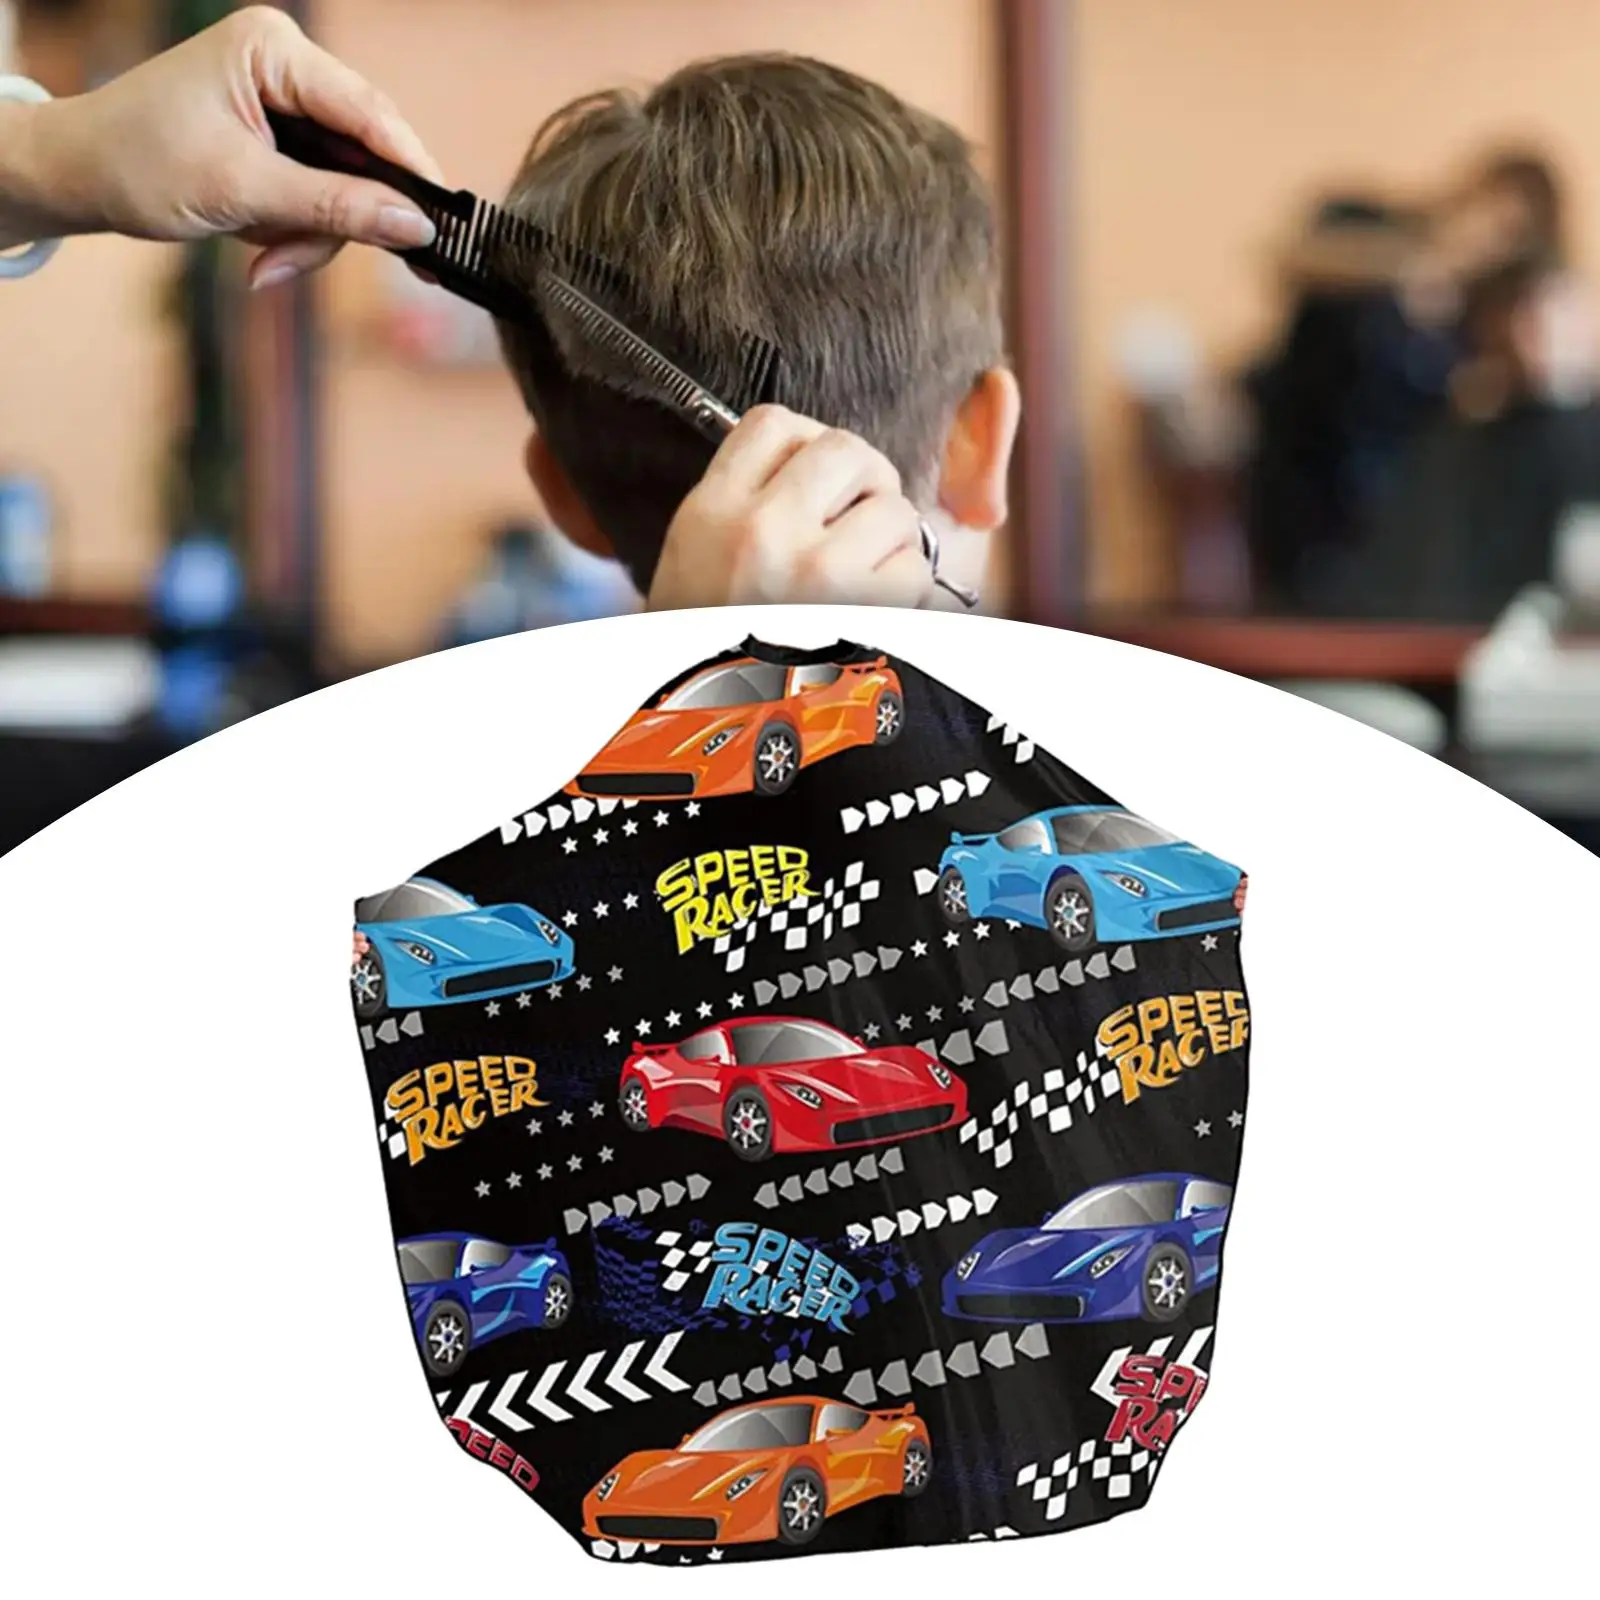 Kids Haircut Cape Barber Accessories Styling Tools Waterproof Adjustable Kids Barber Cape for Shop Hair Dye Home Shampooing Perm